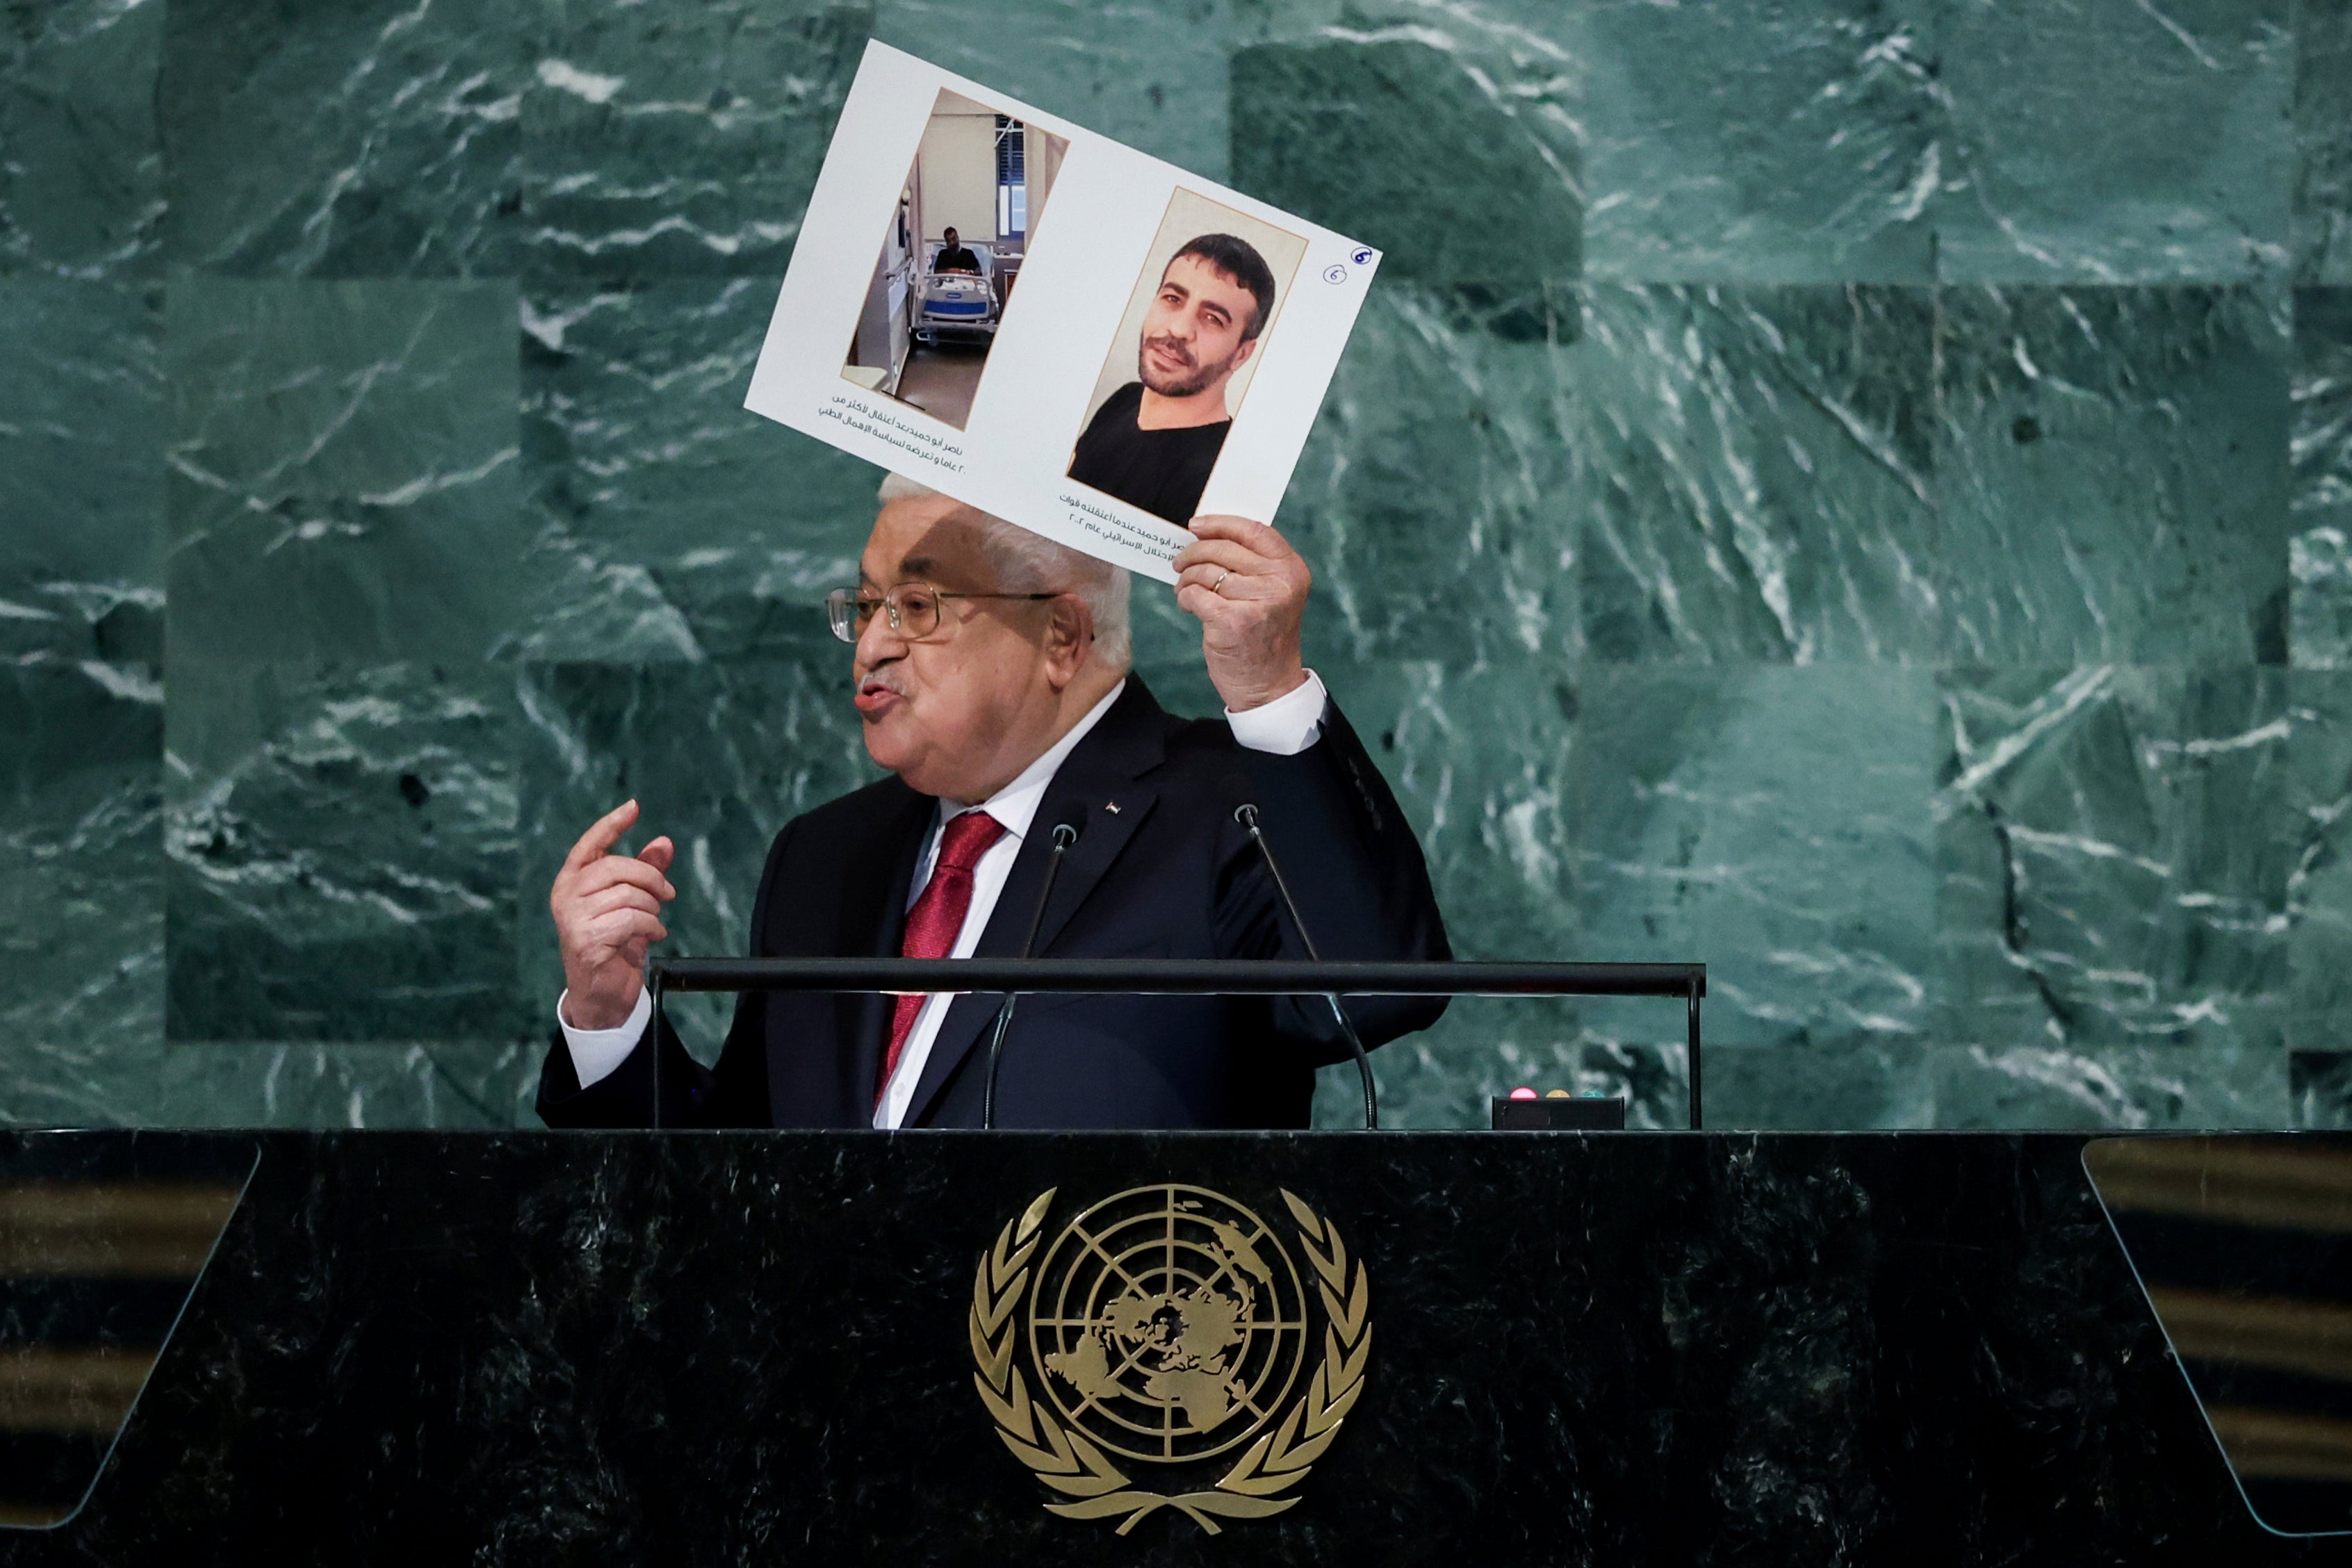 Palestinian President Mahmoud Abbas holds up photographs while addressing the 77th session of the United Nations General Assembl